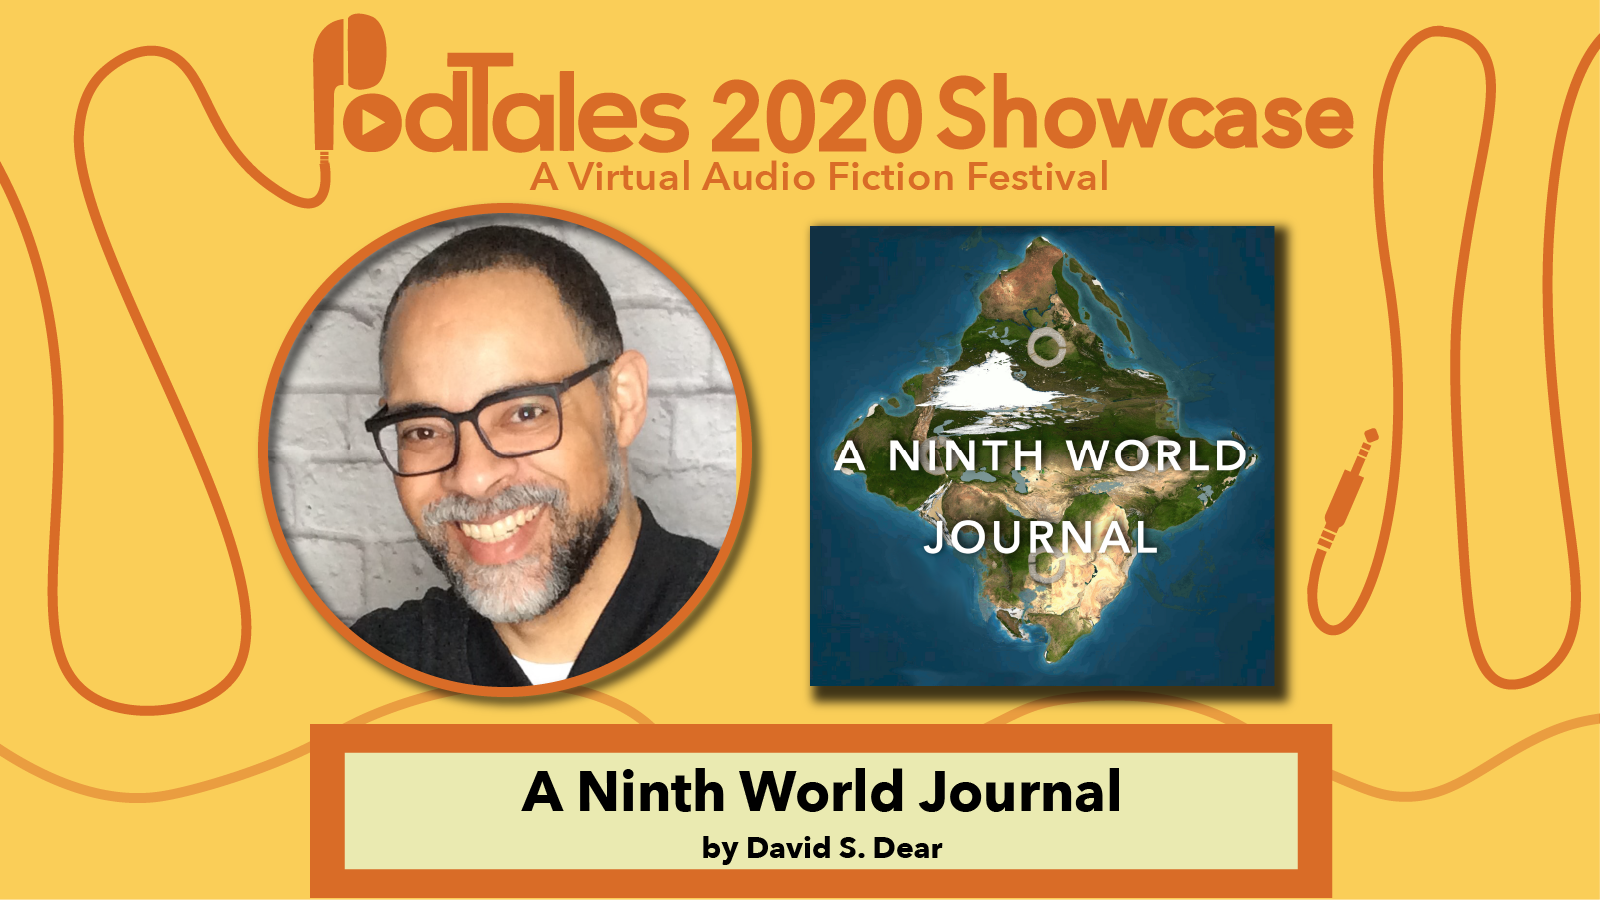 Text reading “PodTales 2020 Showcase: A Virtual Audio Fiction Festival”, Photo of David S. Dear, Show Art for A Ninth World Journal, Text reading “A Ninth World Journal by David S. Dear”